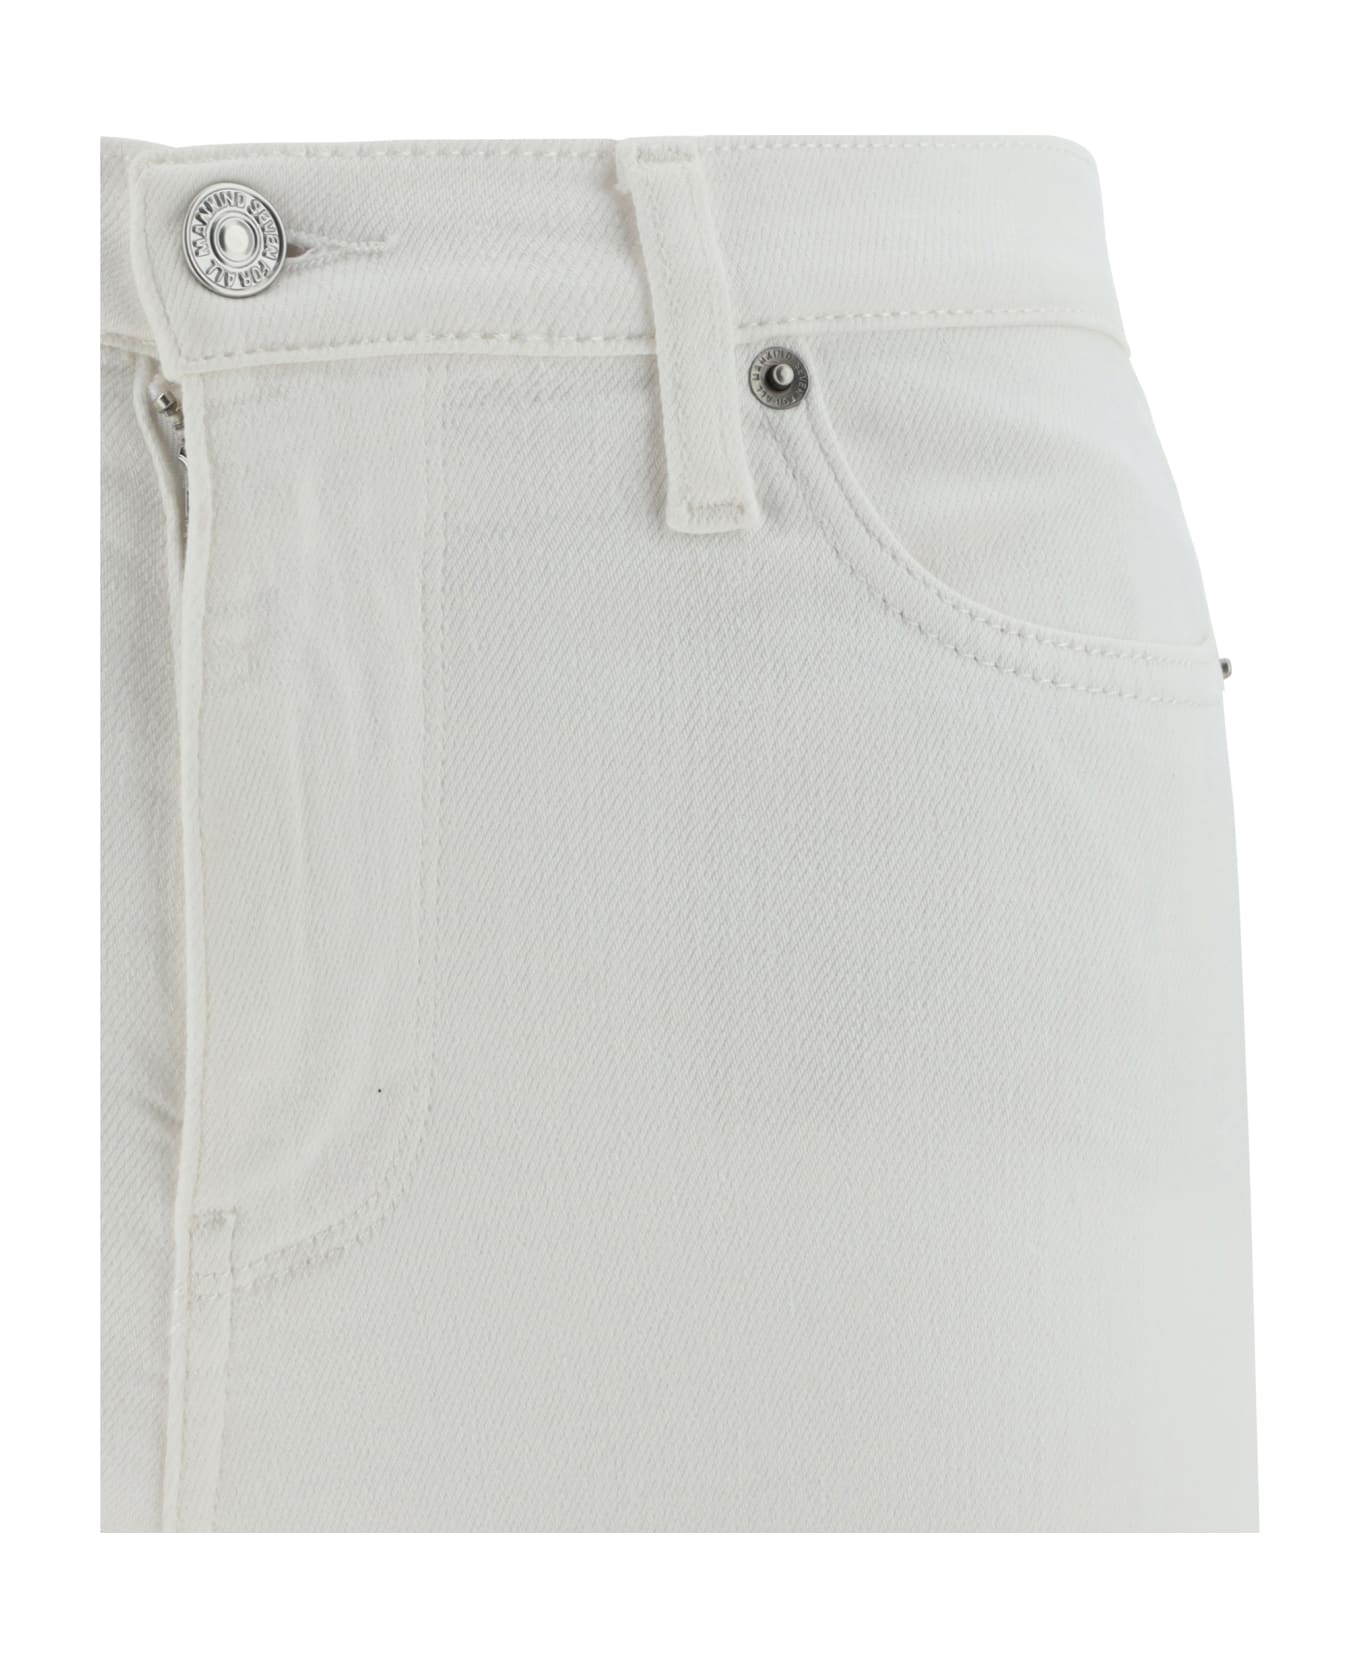 7 For All Mankind Soleil Pants - White ボトムス